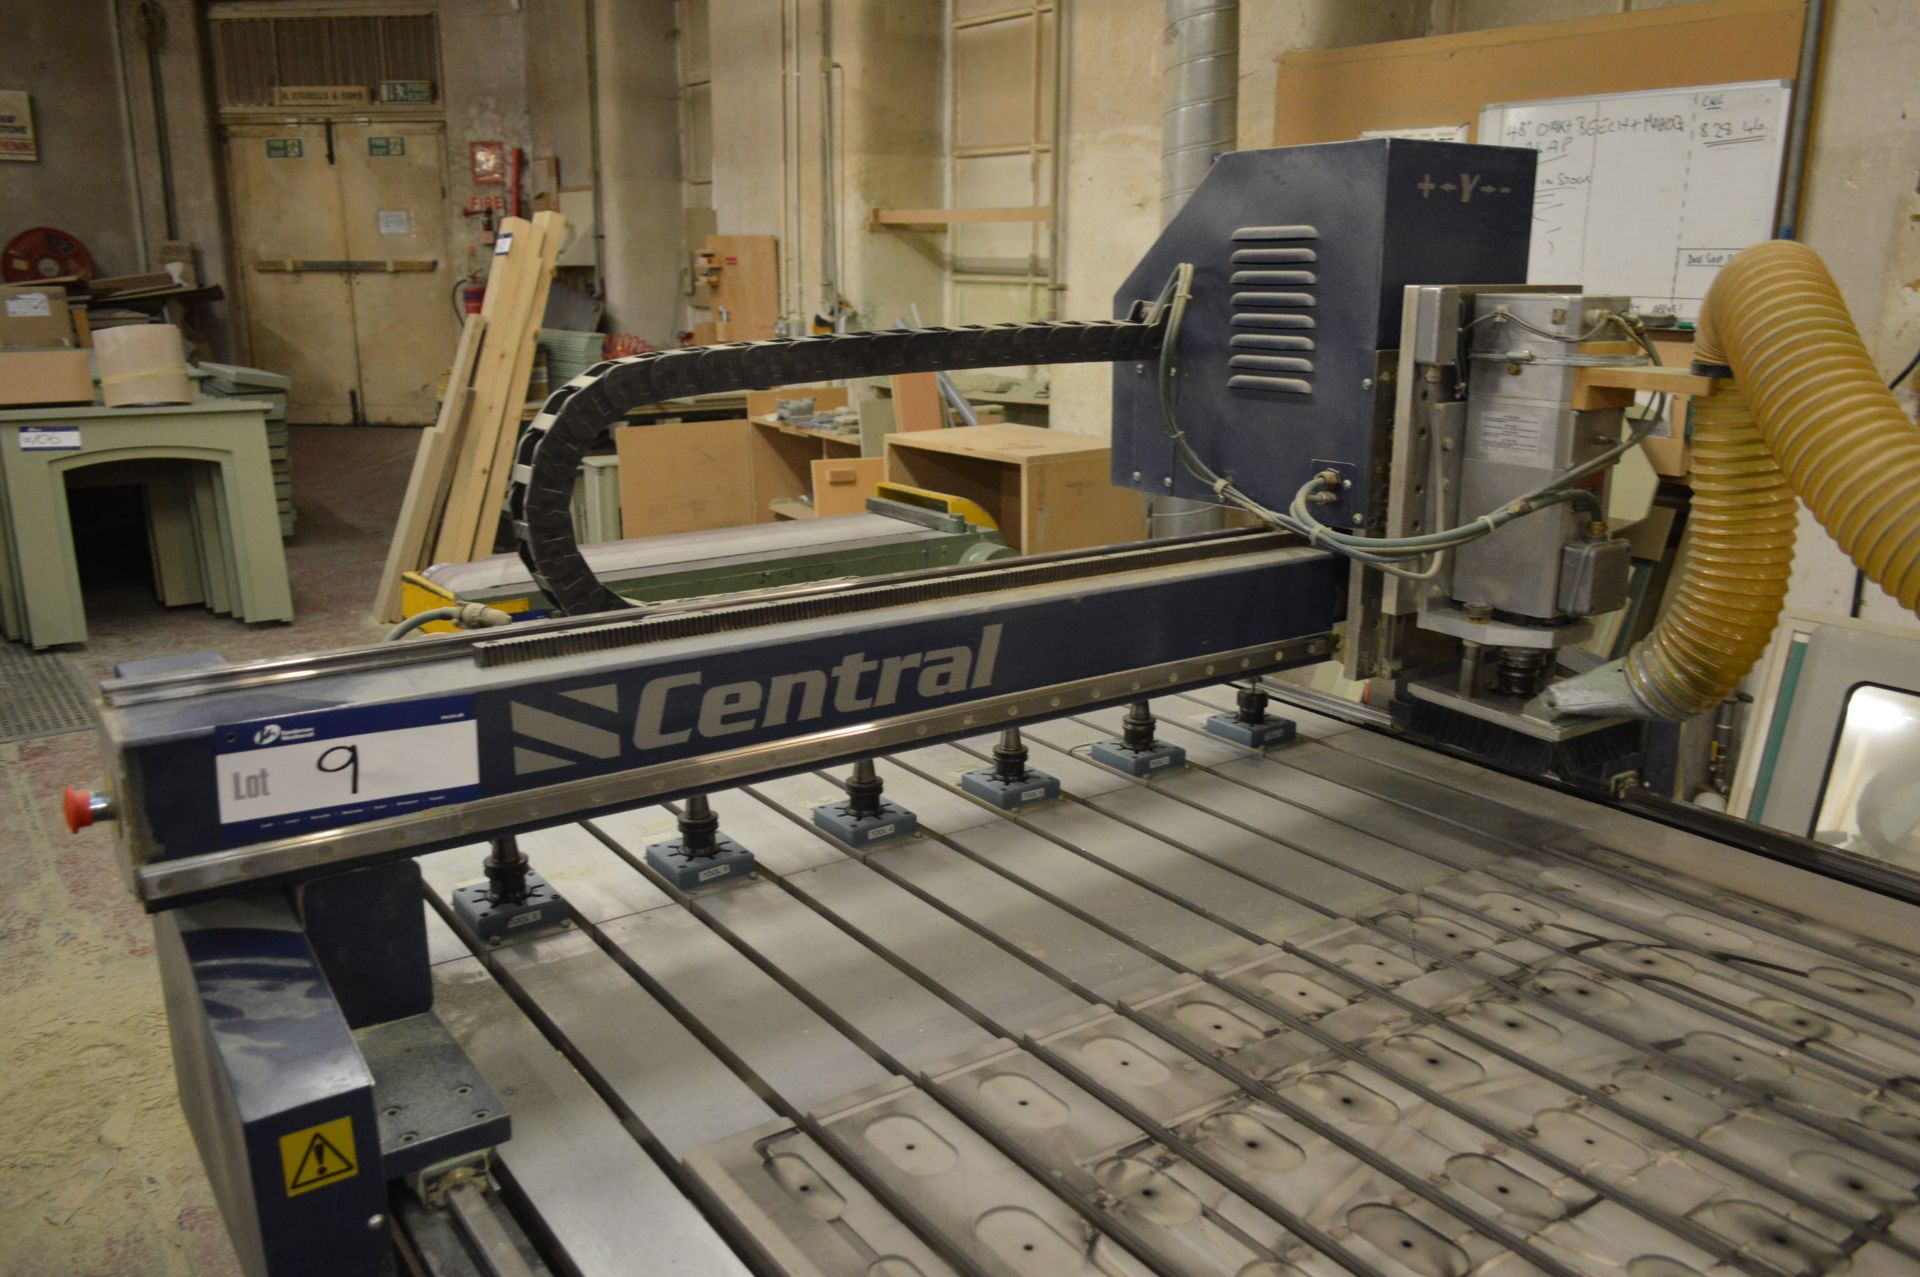 Central CNC1484D CNC ROUTER, serial no. 30/38245GT, with machining table, approx. 2.44m x 1.28m, E. - Image 7 of 8